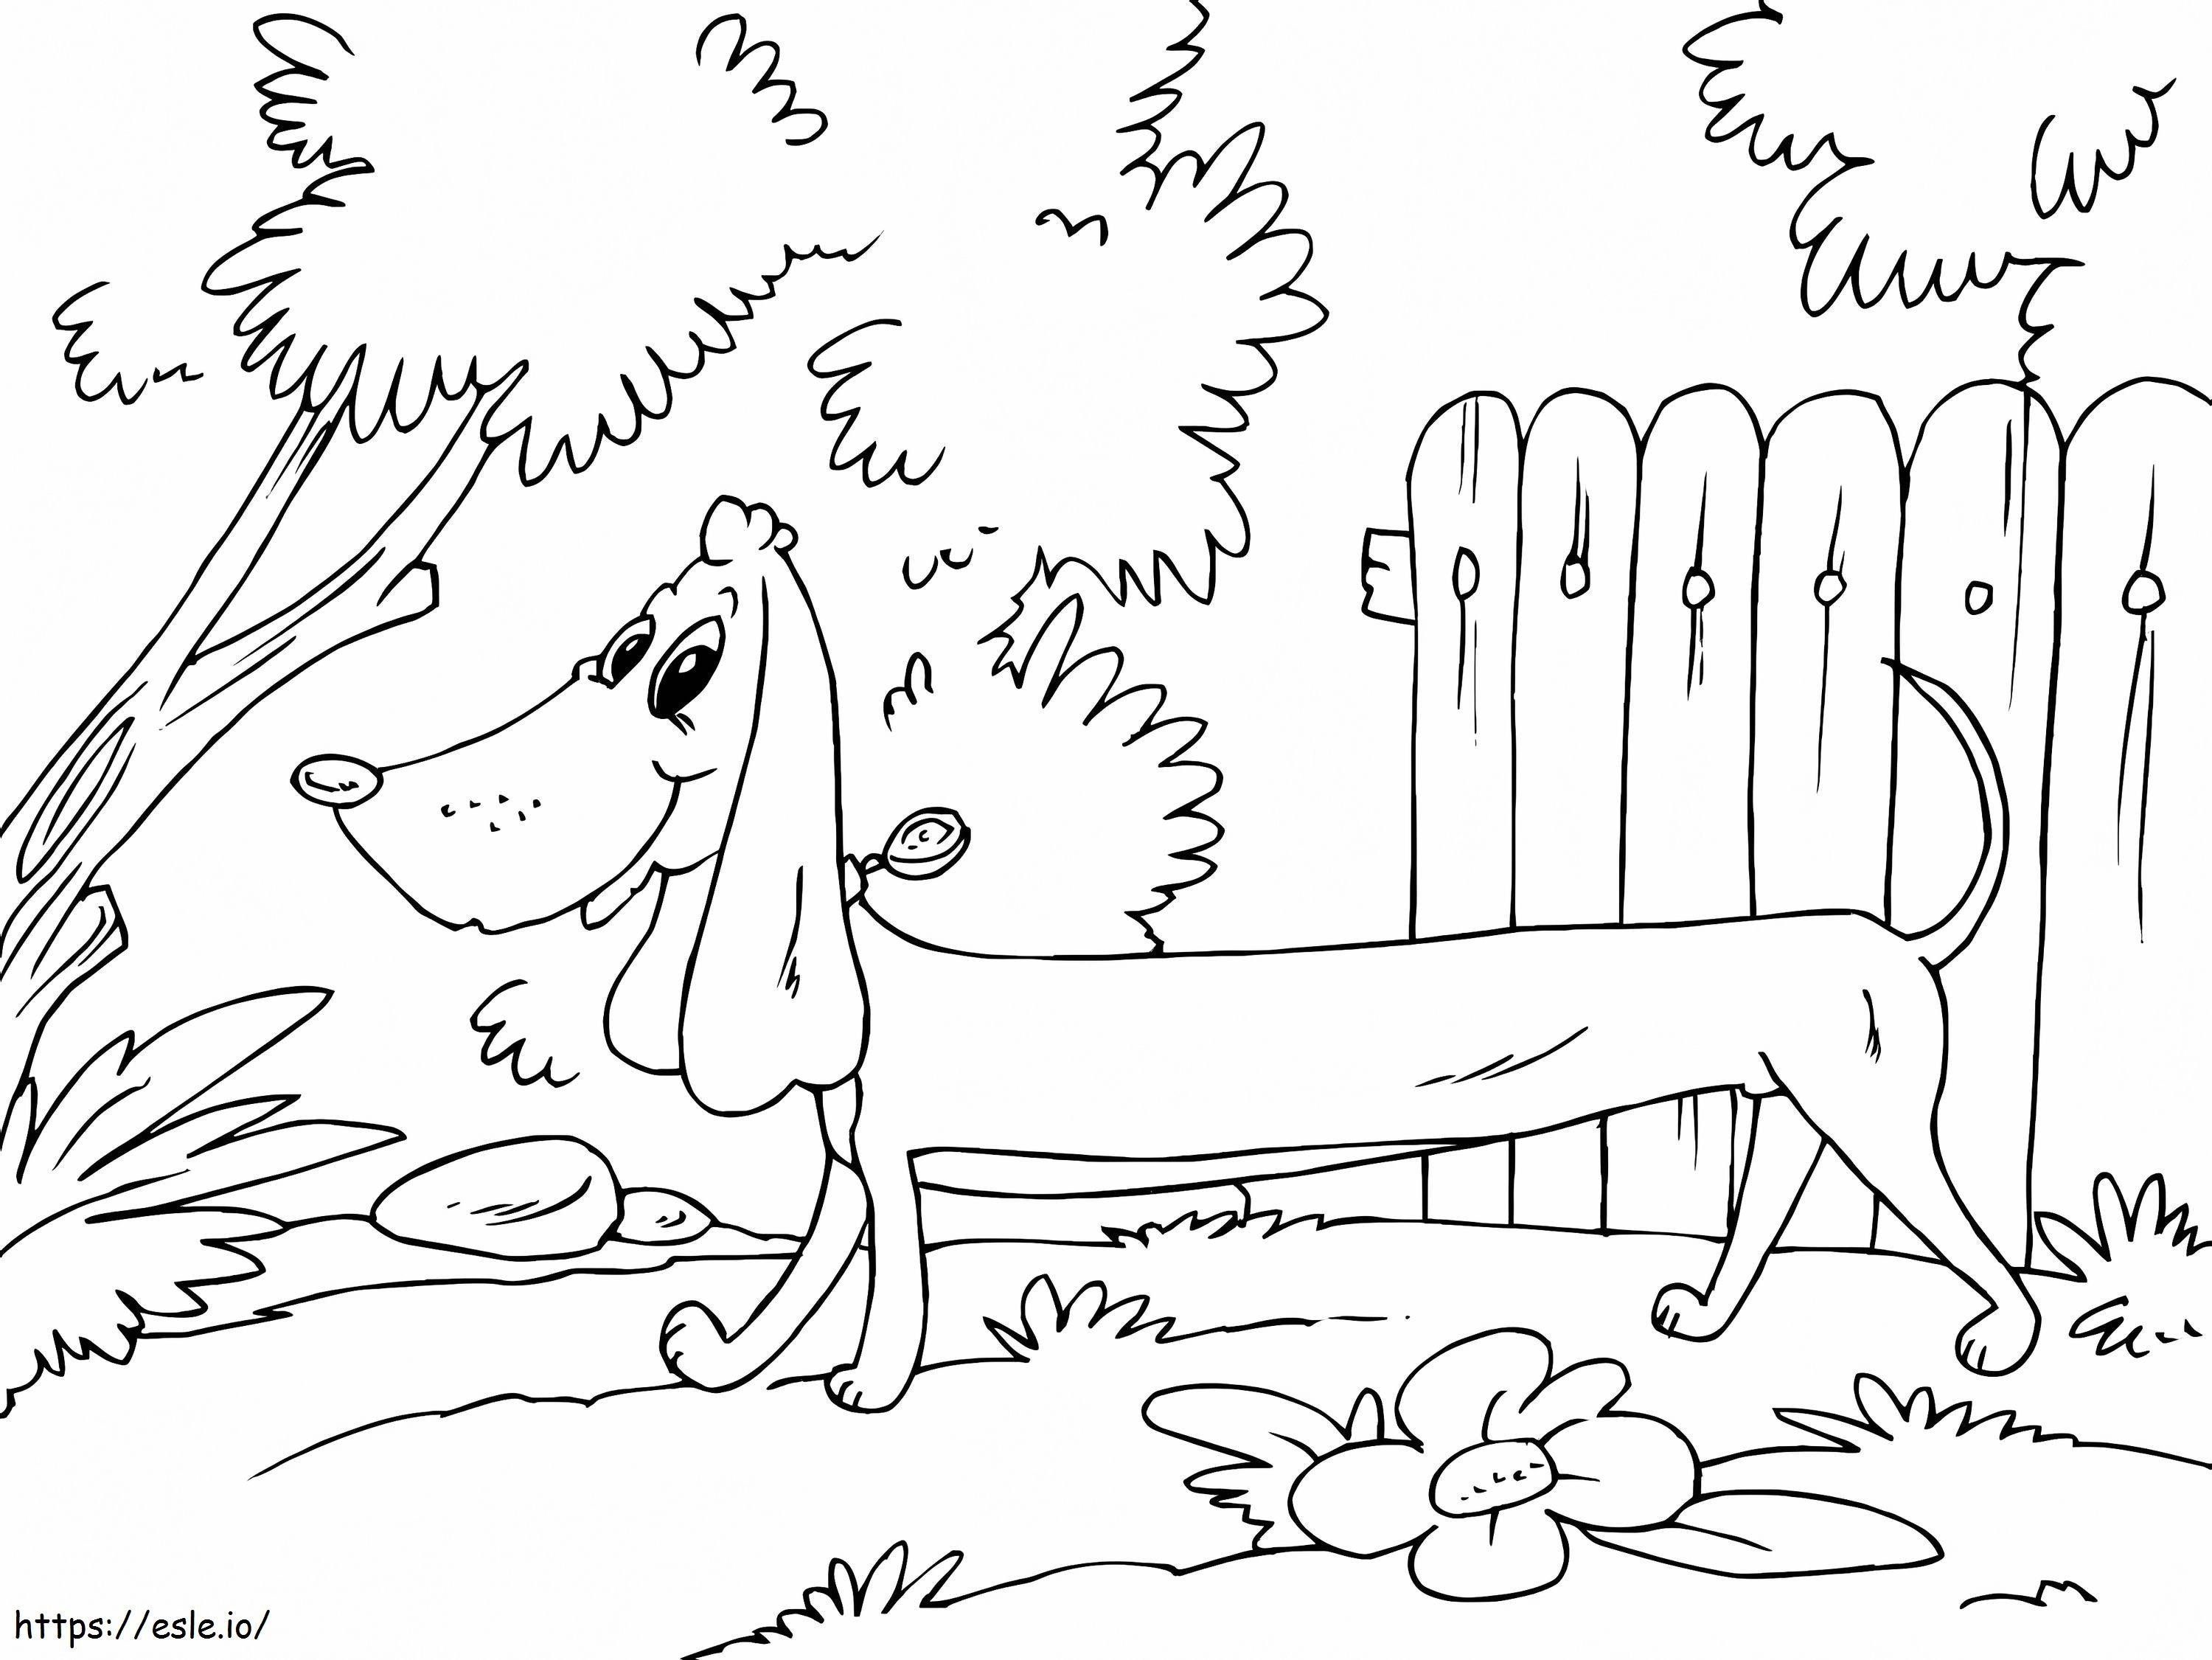 Smiling Dachshund coloring page